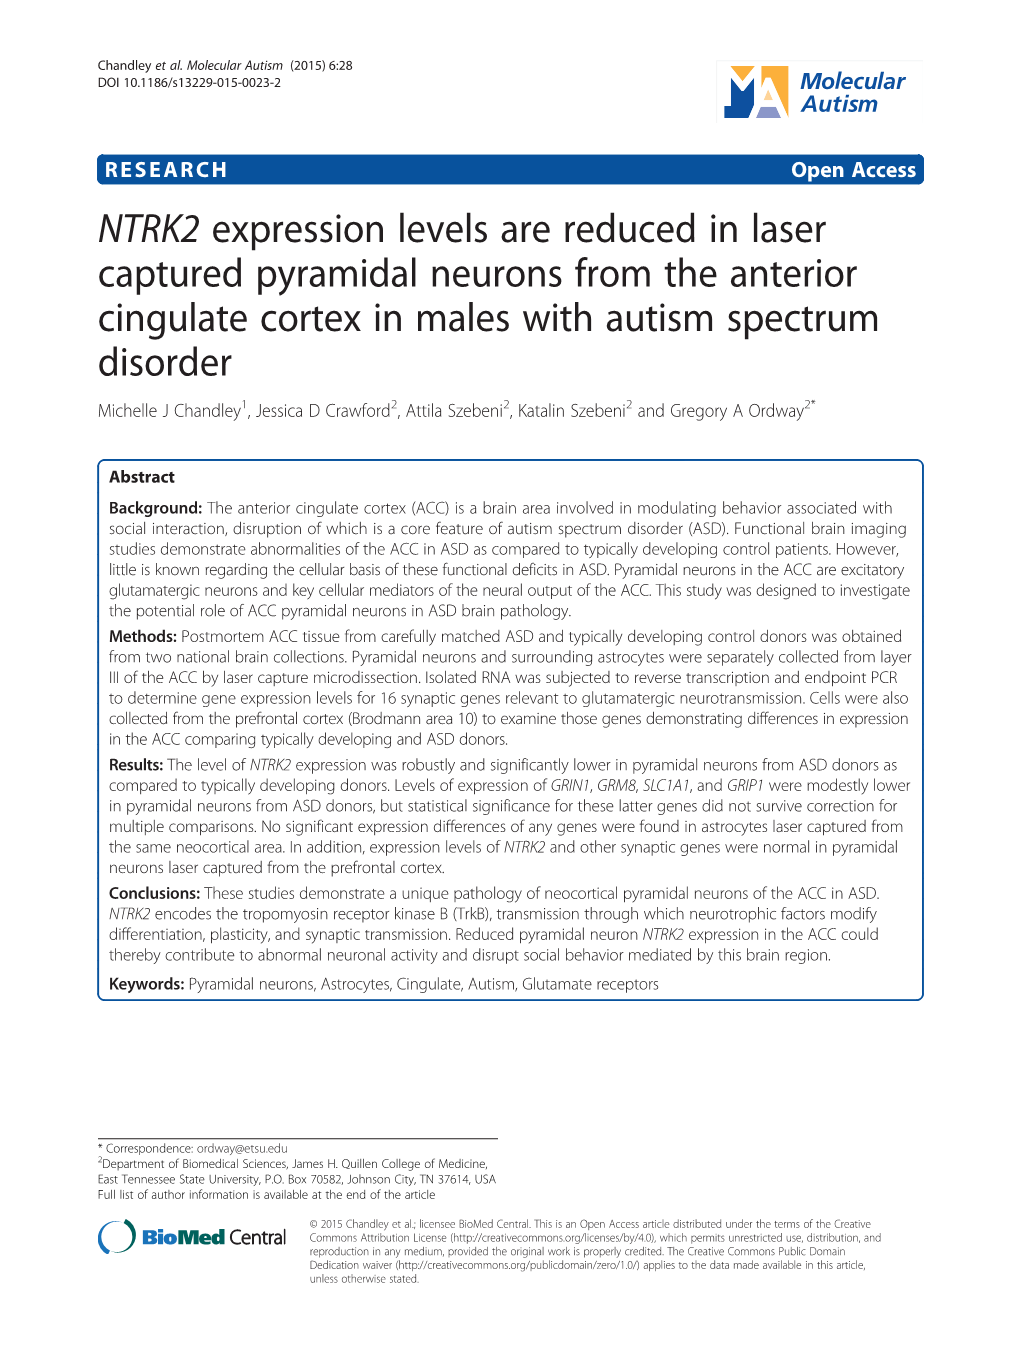 NTRK2 Expression Levels Are Reduced in Laser Captured Pyramidal